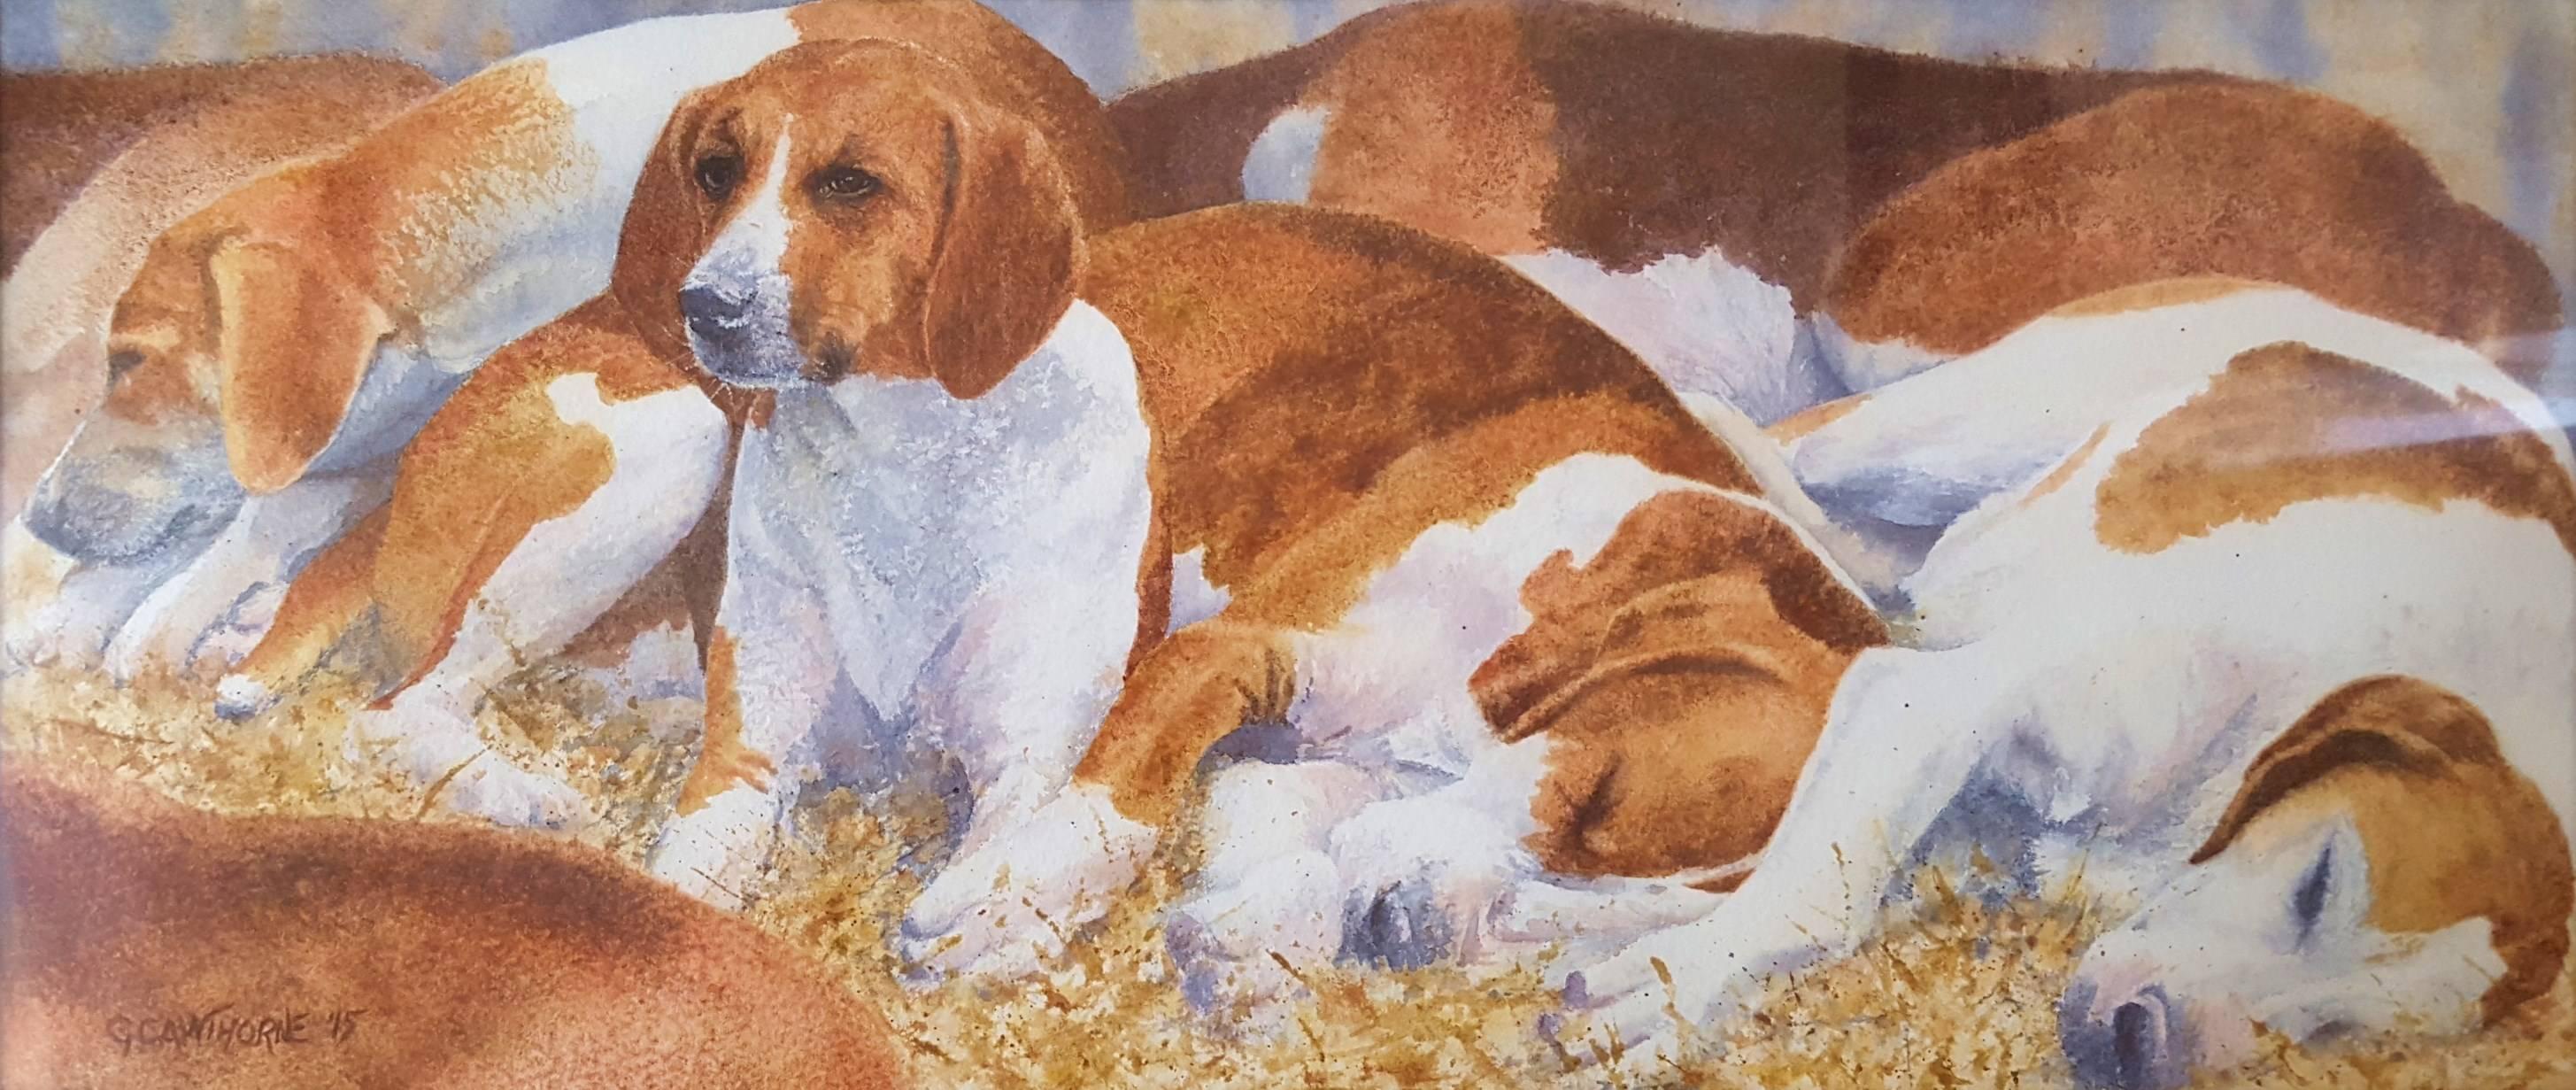 Artist: Gillie Cawthorne (English, 1963-)
Title: "Sleeping Hounds"
*Signed and dated by Cawthorne lower left
Year: 2015
Medium: Original Watercolor on paper
Framing: Framed with moulding from Spain and double matted with matting from Holland. All